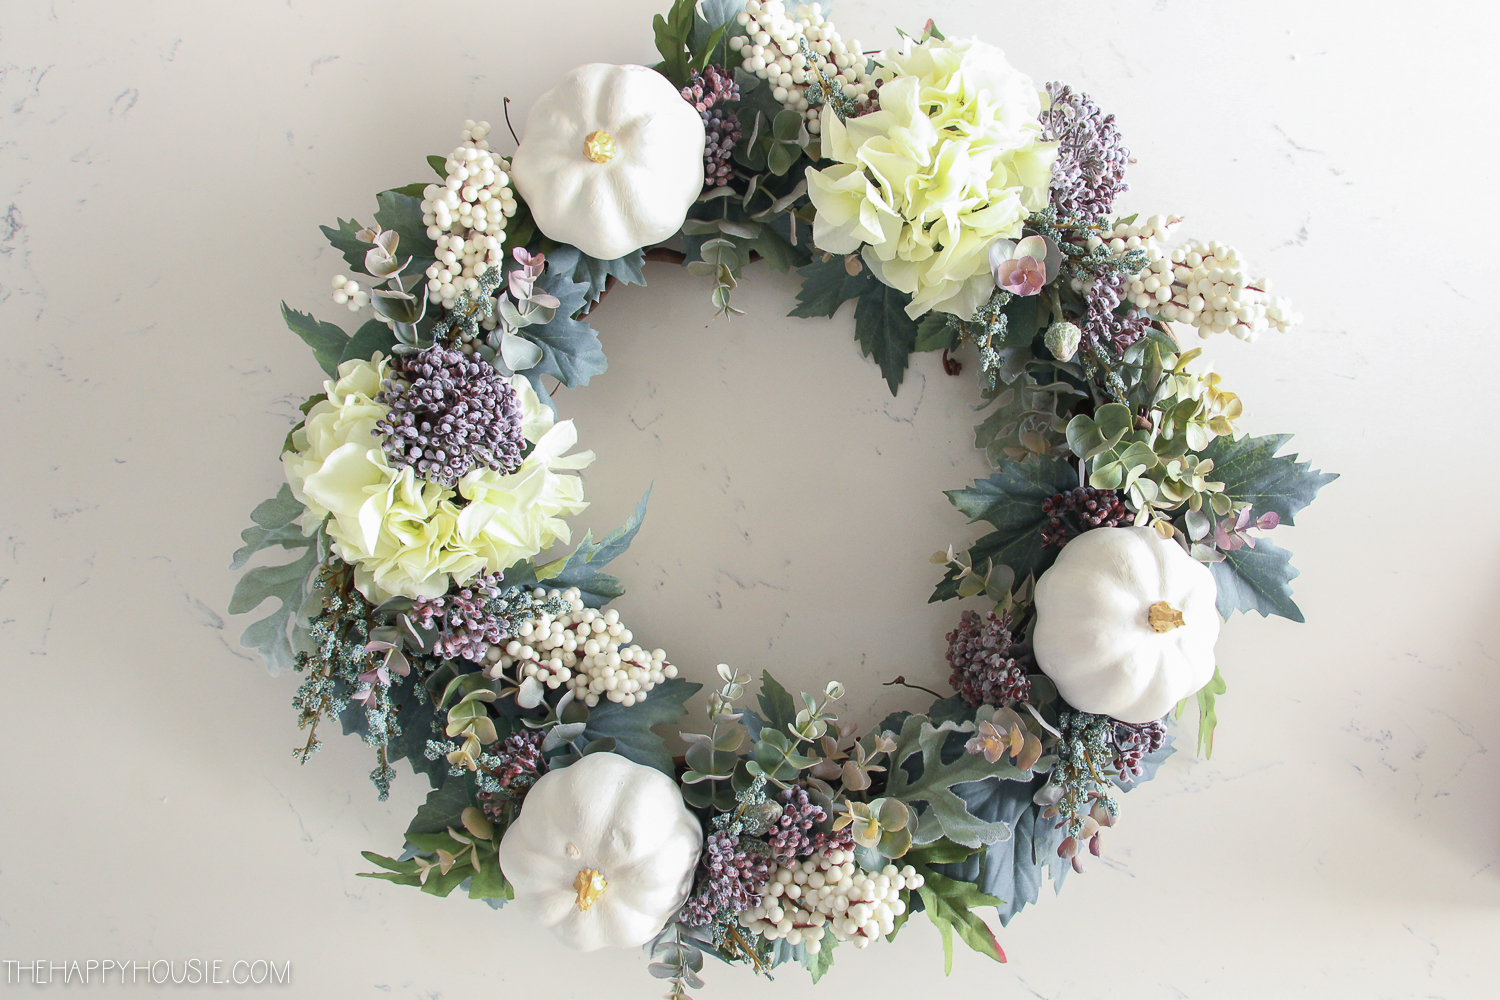 How to Make a High-End Style DIY Fall Wreath on a Budget